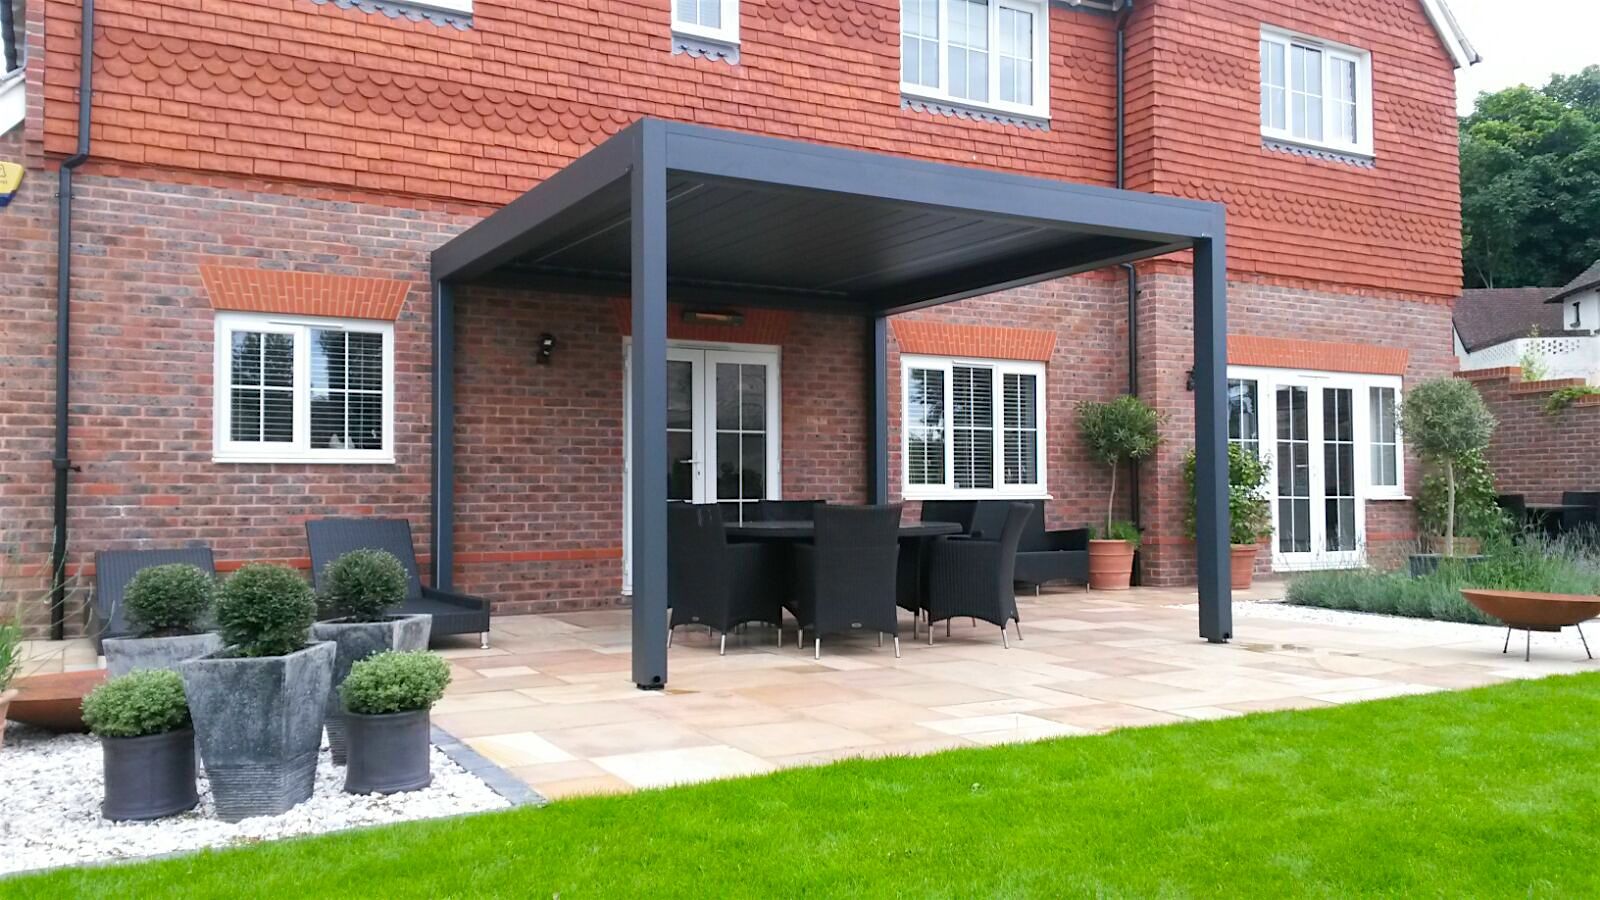 Outdoor Living Pod, Louvered Roof Patio Canopy Installation in Findon, West Sussex. homify Modern style gardens outdoor living pod,louvered,roof,patio,terrace,canopy,garden,room